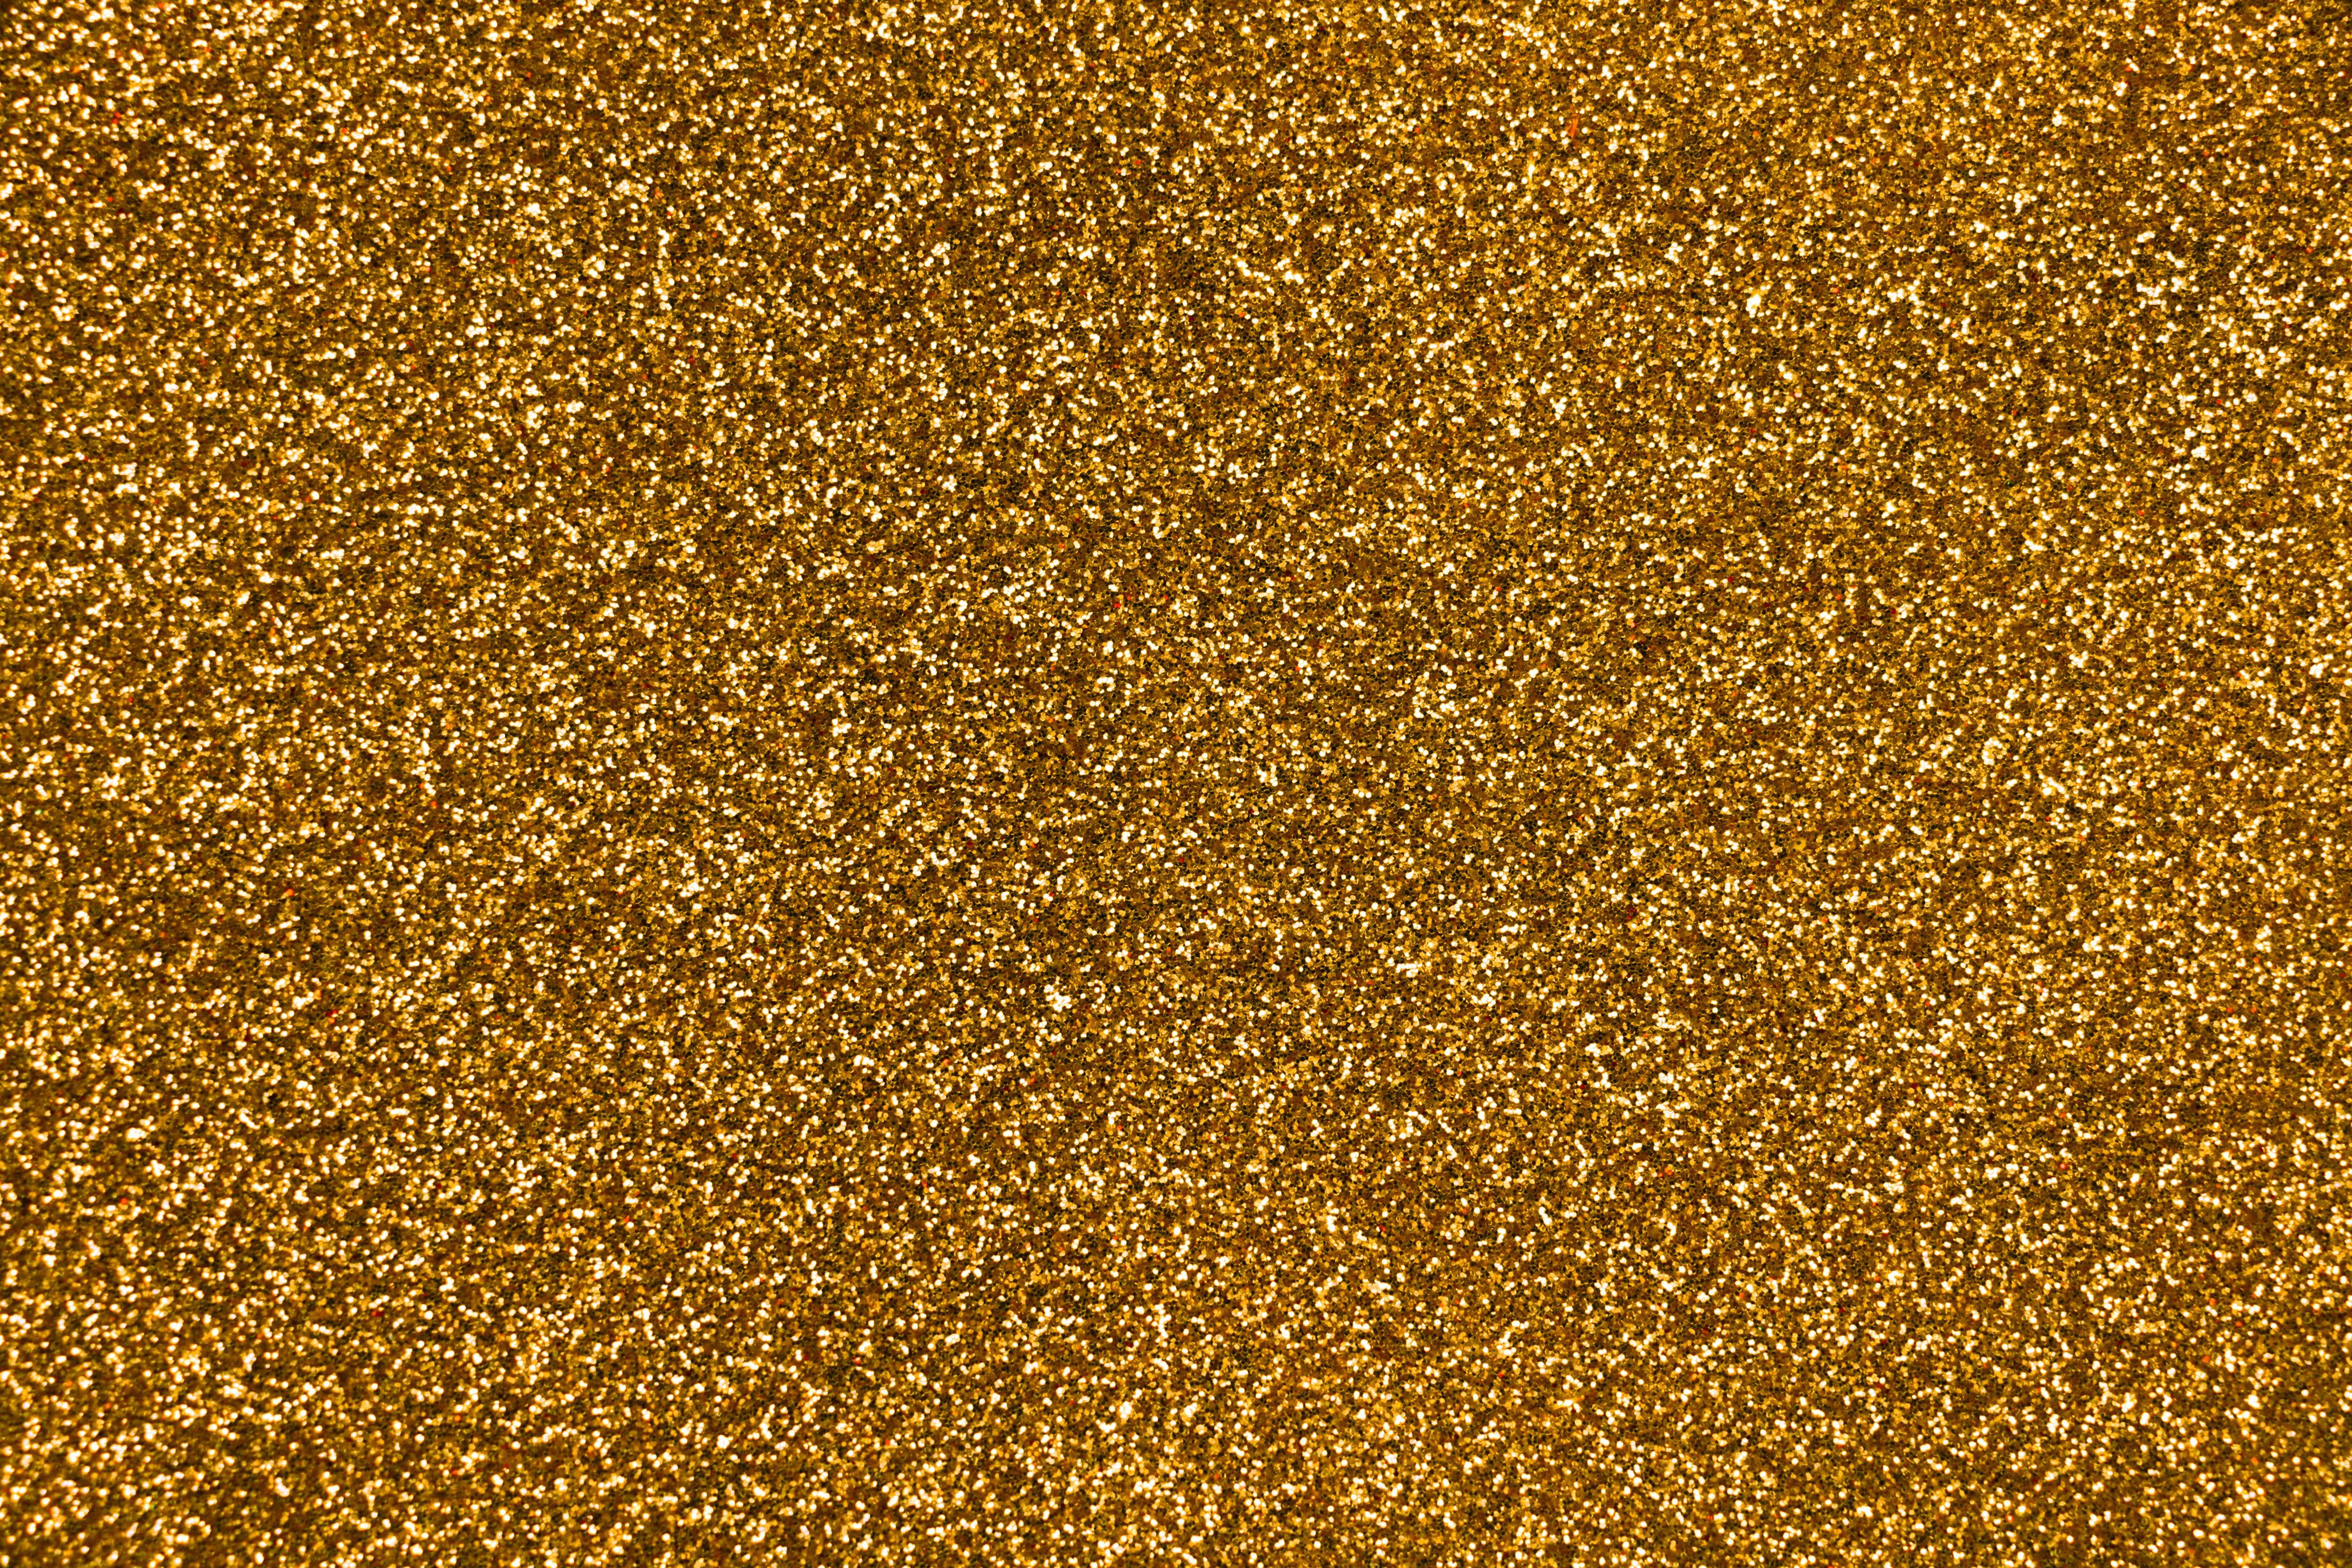 120972 download wallpaper textures, gold, texture, surface screensavers and pictures for free